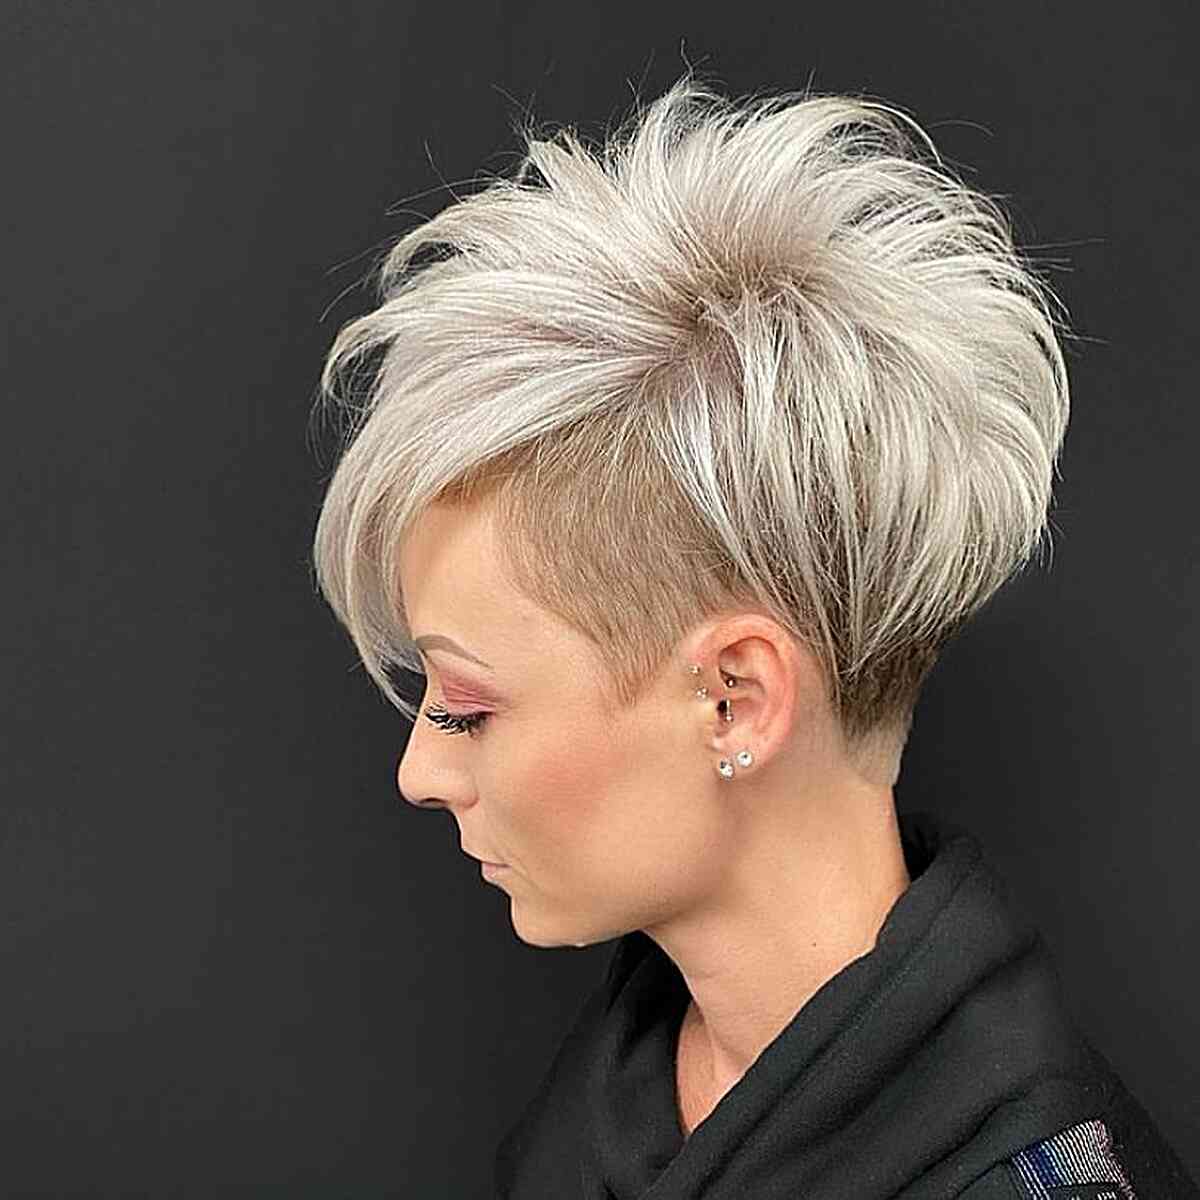 Asymmetrical Short Haircuts for Women in 2021-2022 | Short asymmetrical  haircut, Short hair styles, Asymmetrical hairstyles